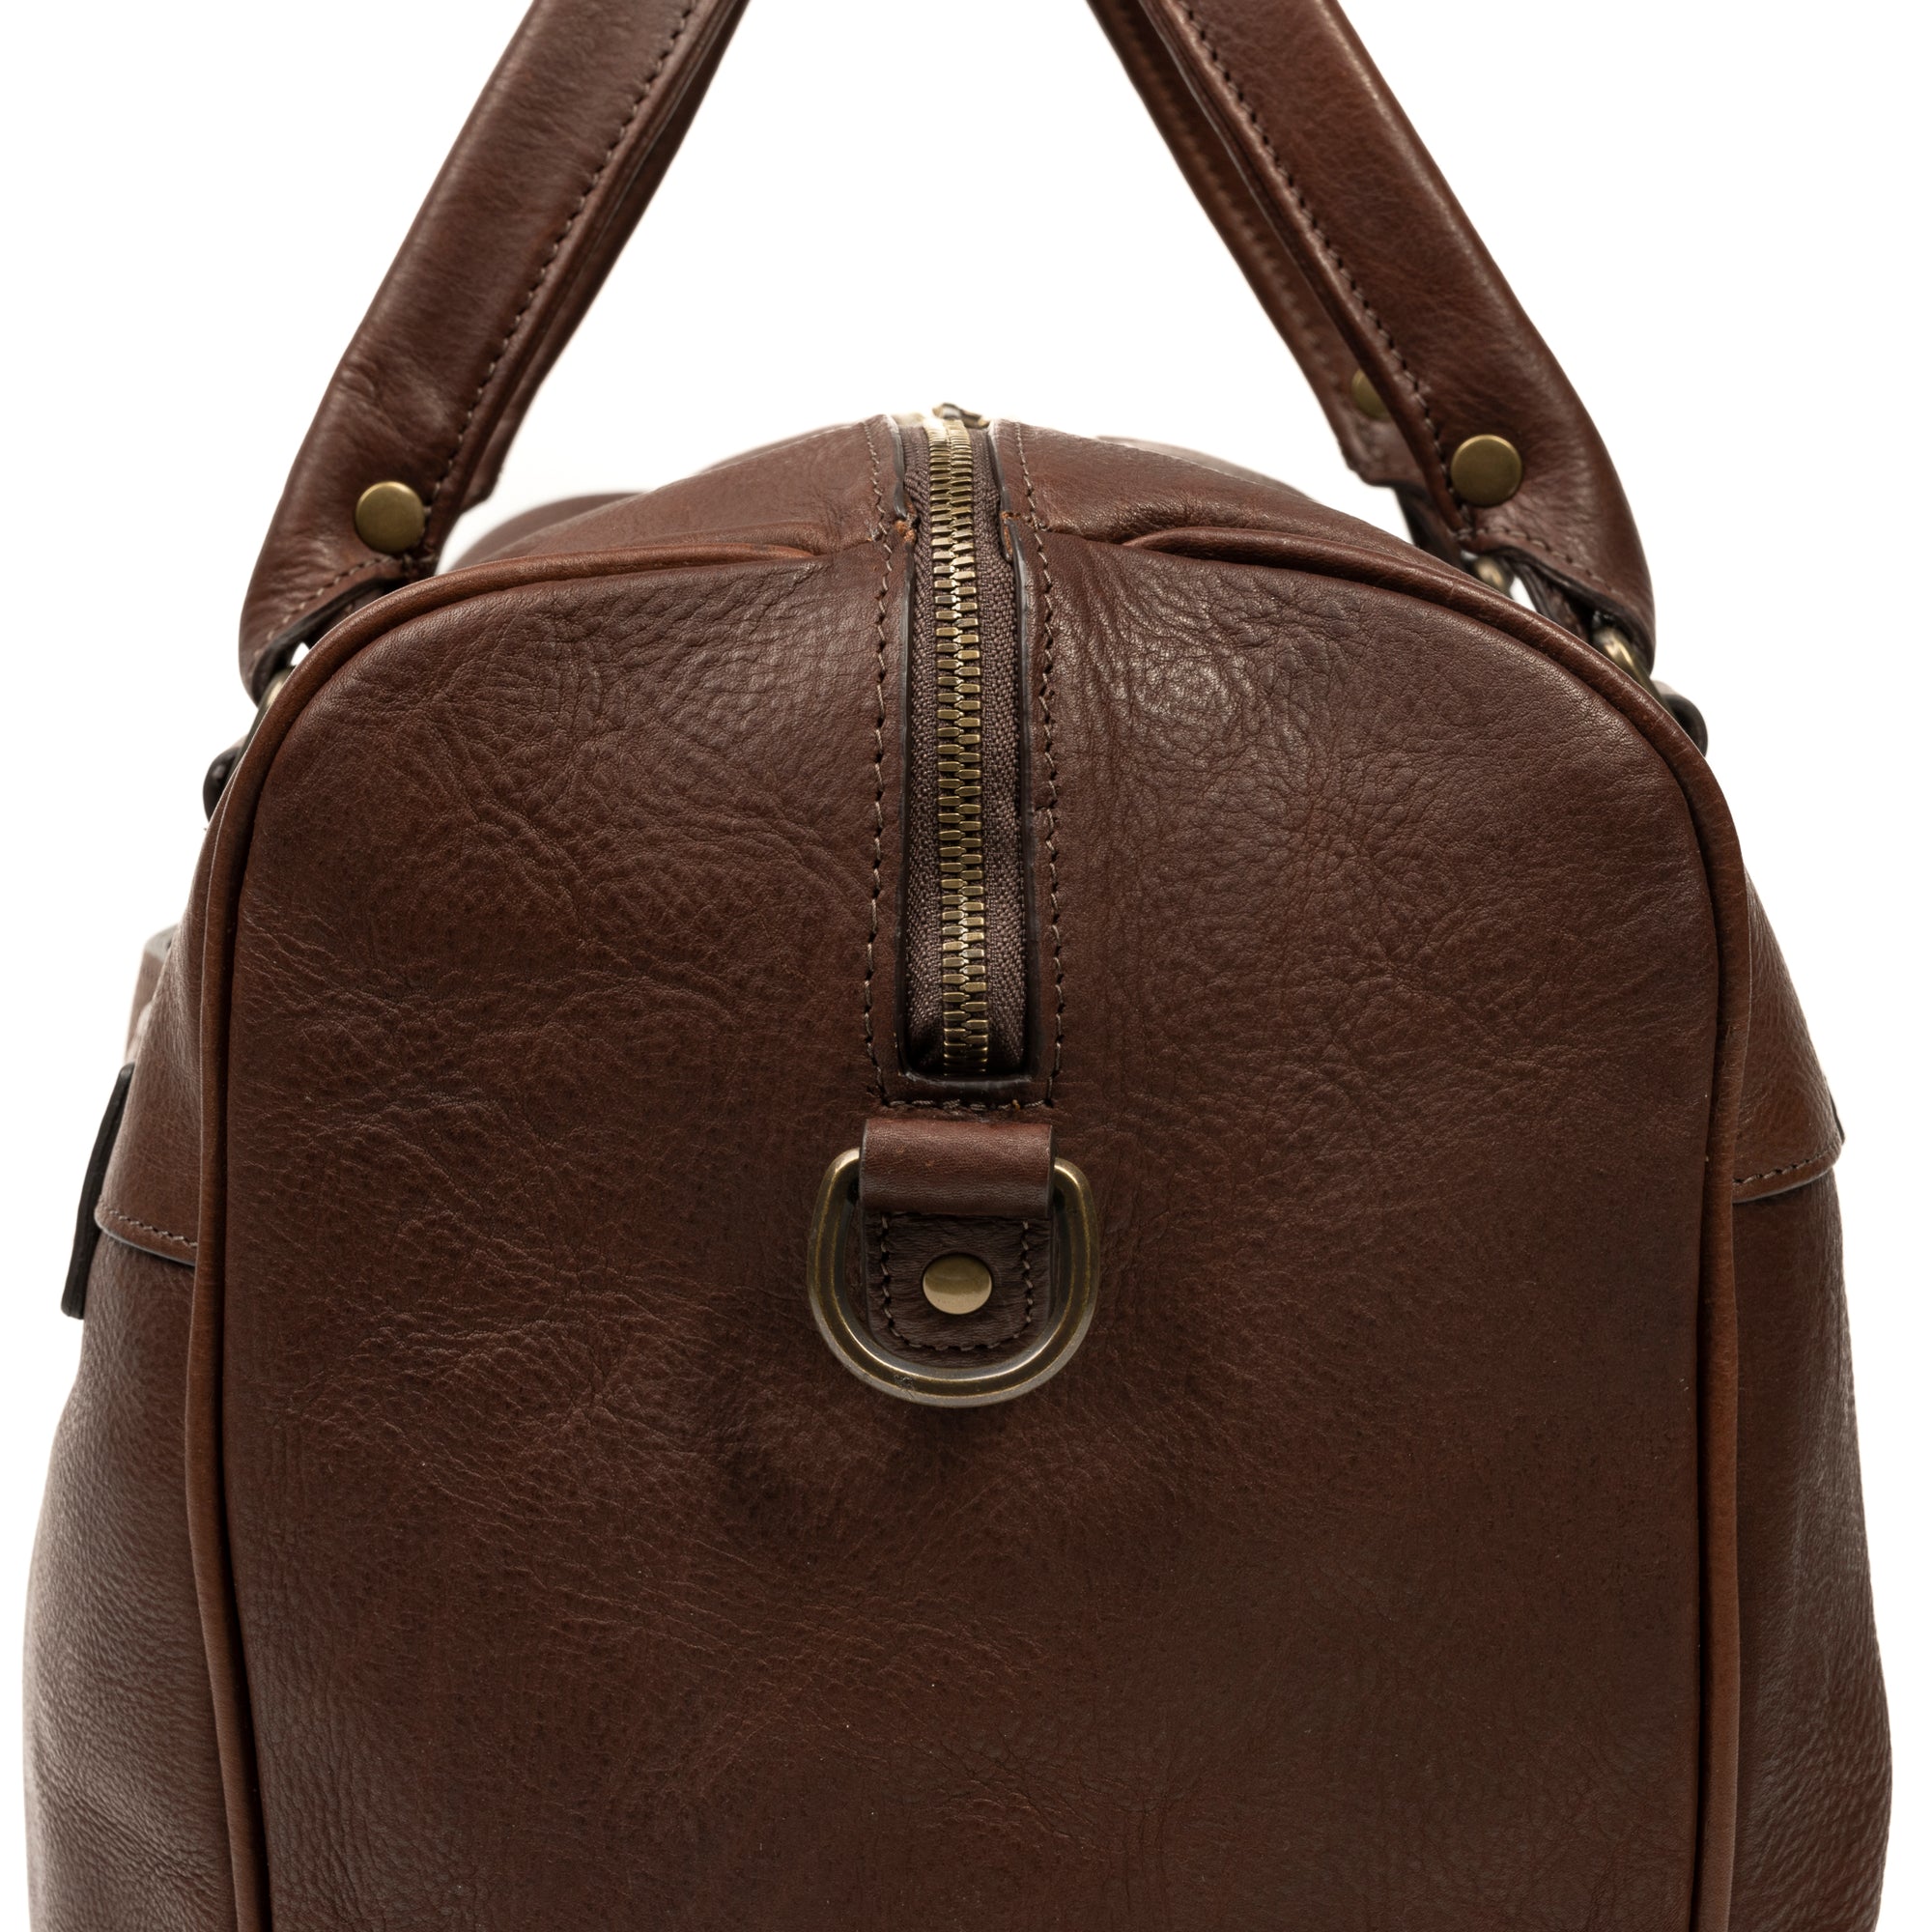 Booker Leather Cabin Duffel in Seven Hills Chocolate by Moore & Giles